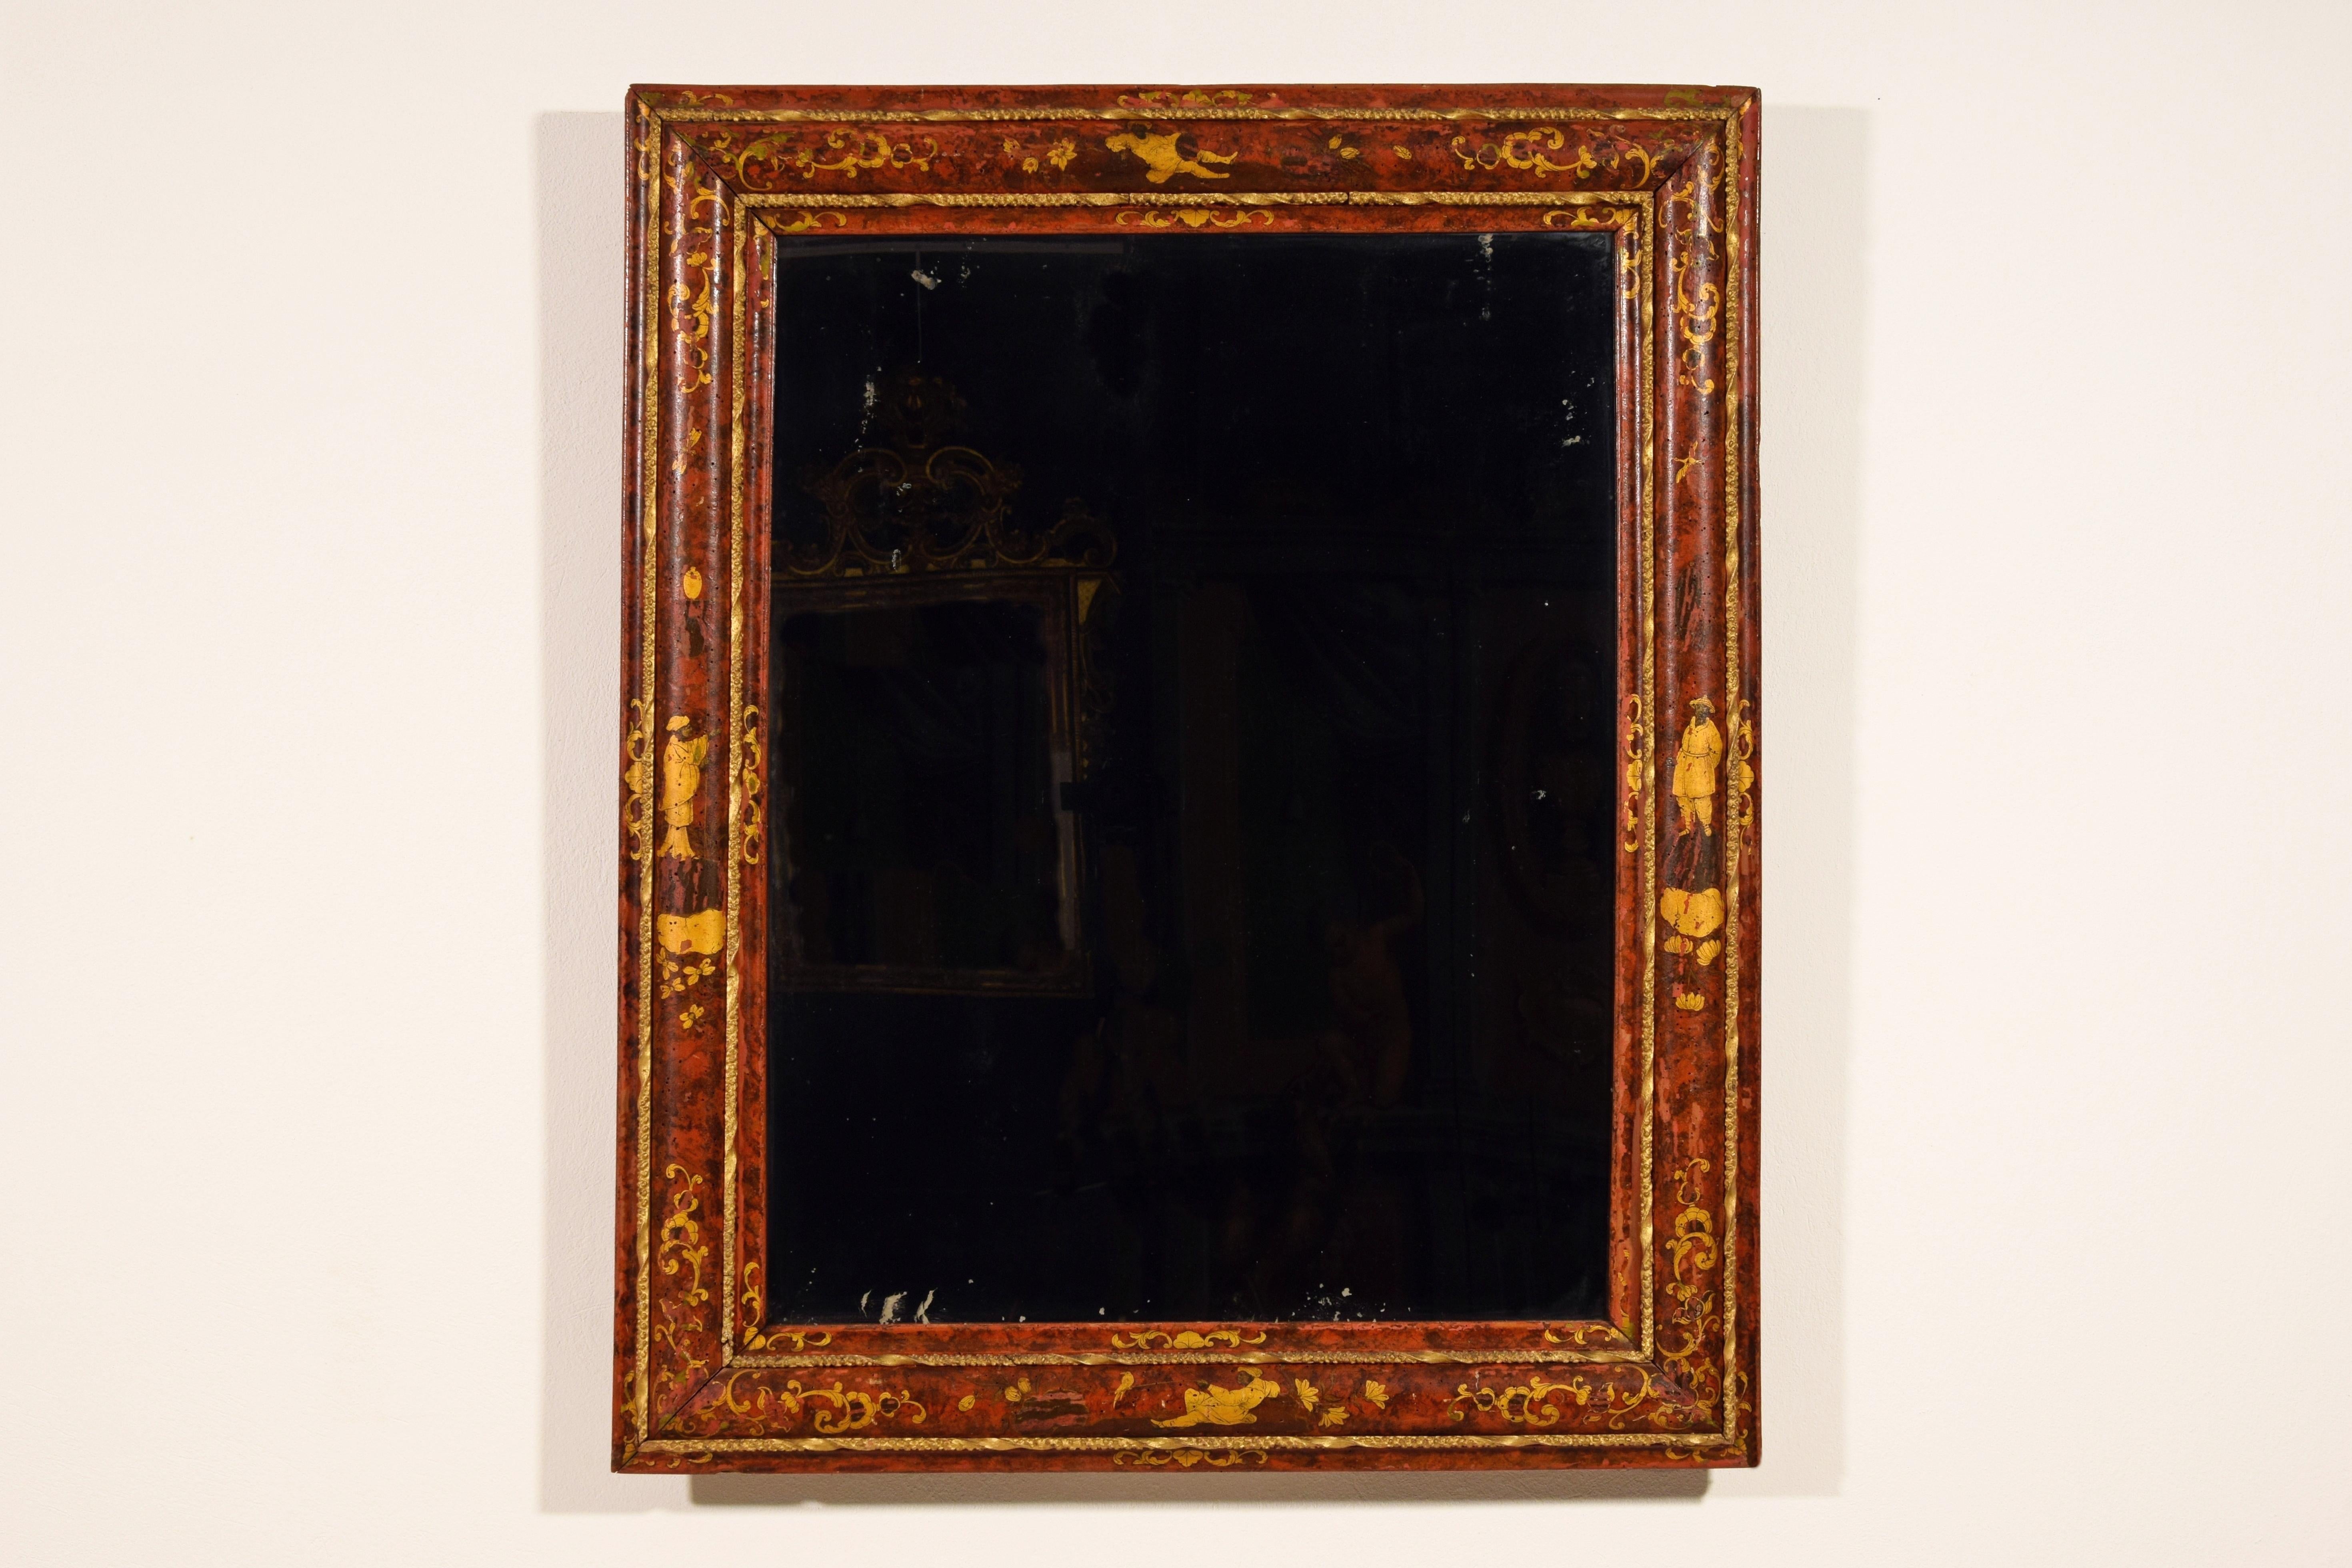 18th century, Venetian wood mirror lacquered with chinoiserie

This important mirror was made in Venice, Italy, in the 18th century. Entirely lacquered in polychrome and gold with subjects to chinoiserie, is the work of the famous lacquerer